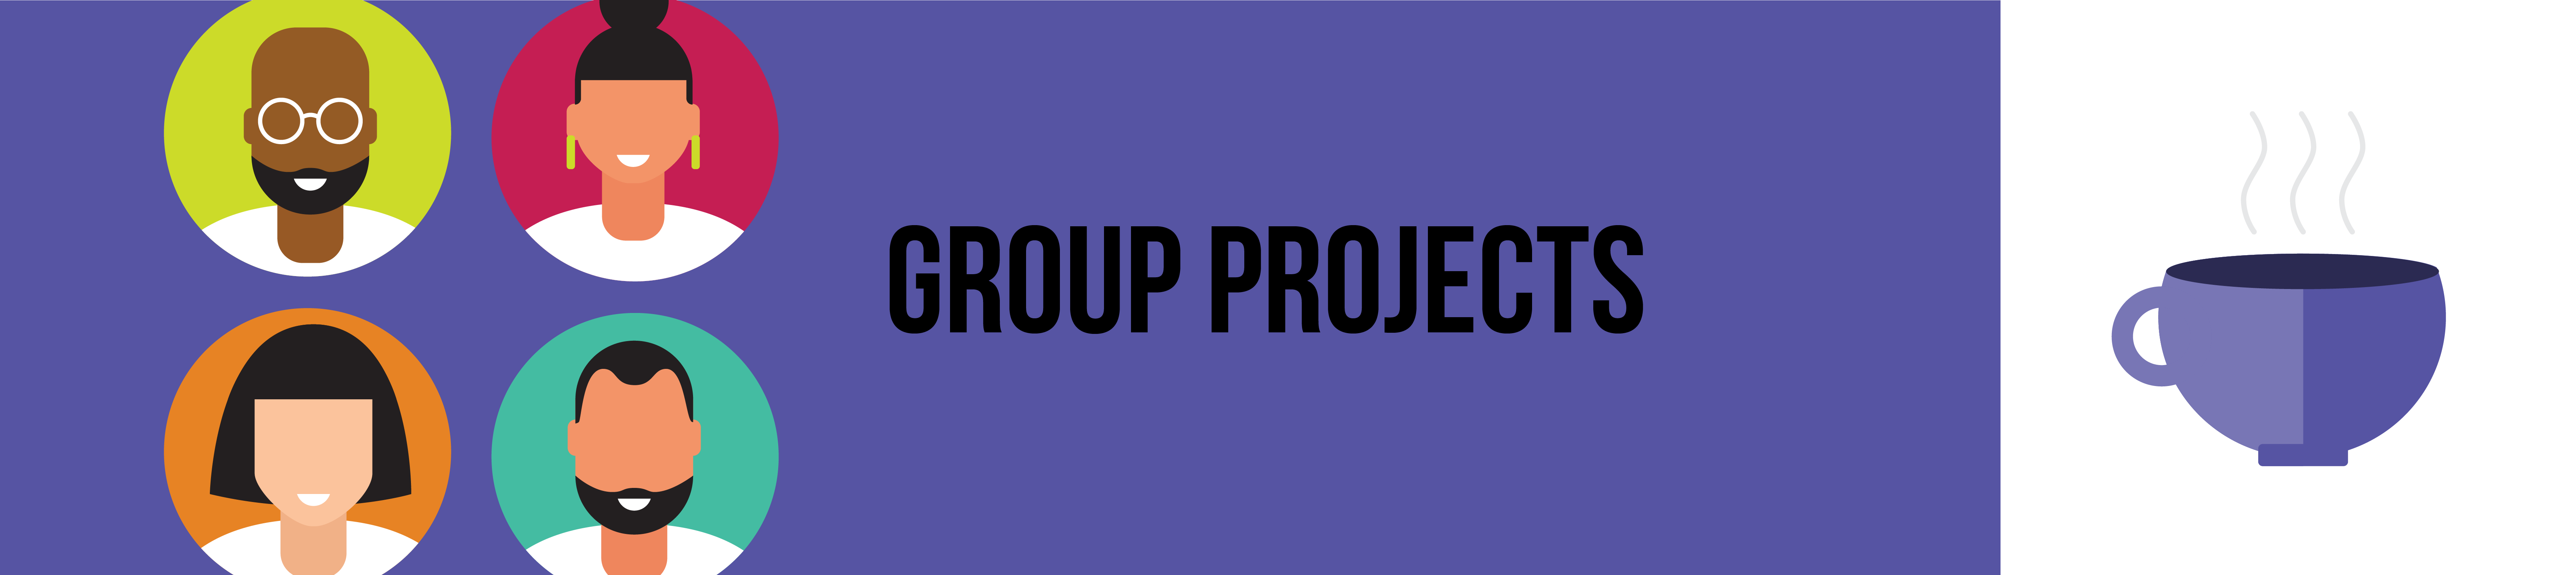 GRAPHIC: four student icons overlaid on purple background. TEXT: Group Projects.